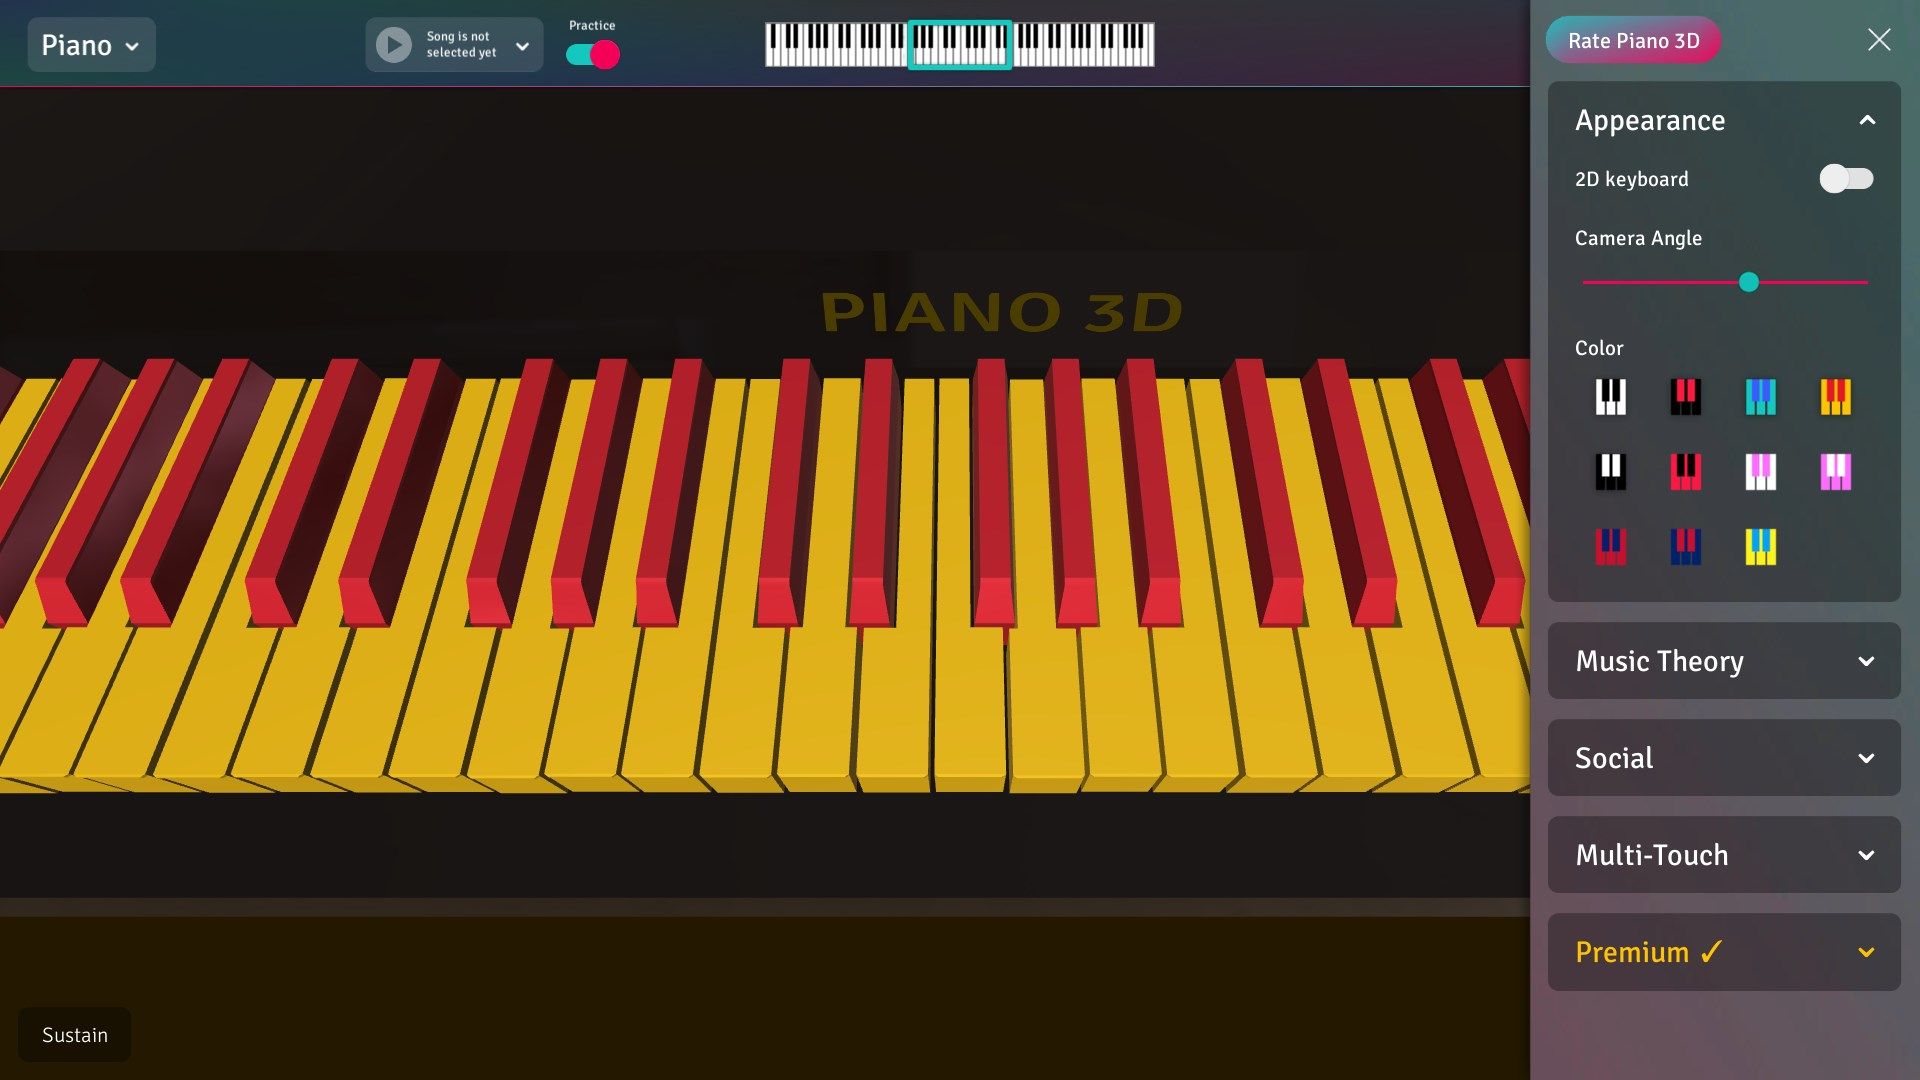 Piano 3D settings allow chenging color, view angle, 2d/3d mode and more!